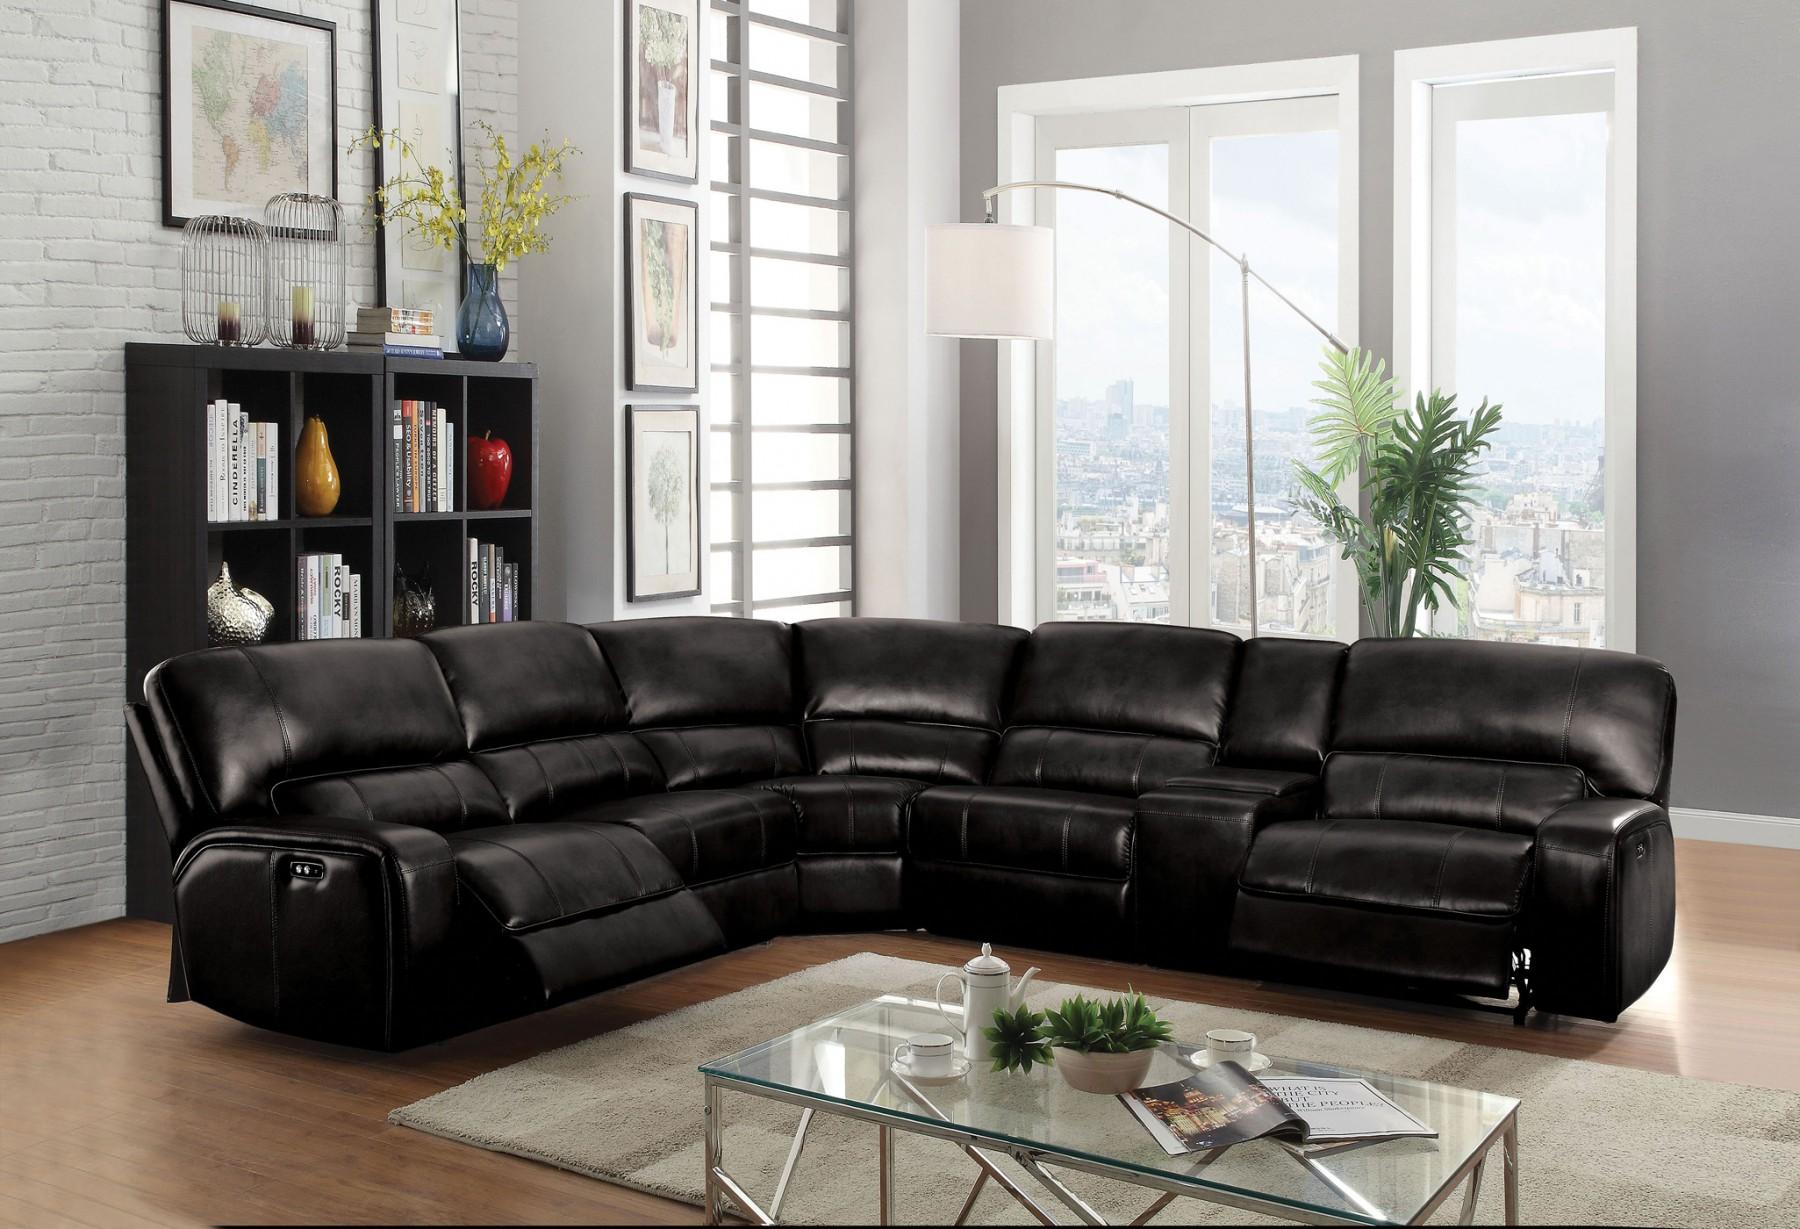 

    
Black Leather Power Motion Sectional Sofa 6PcsAcme Furniture 54150 Saul
